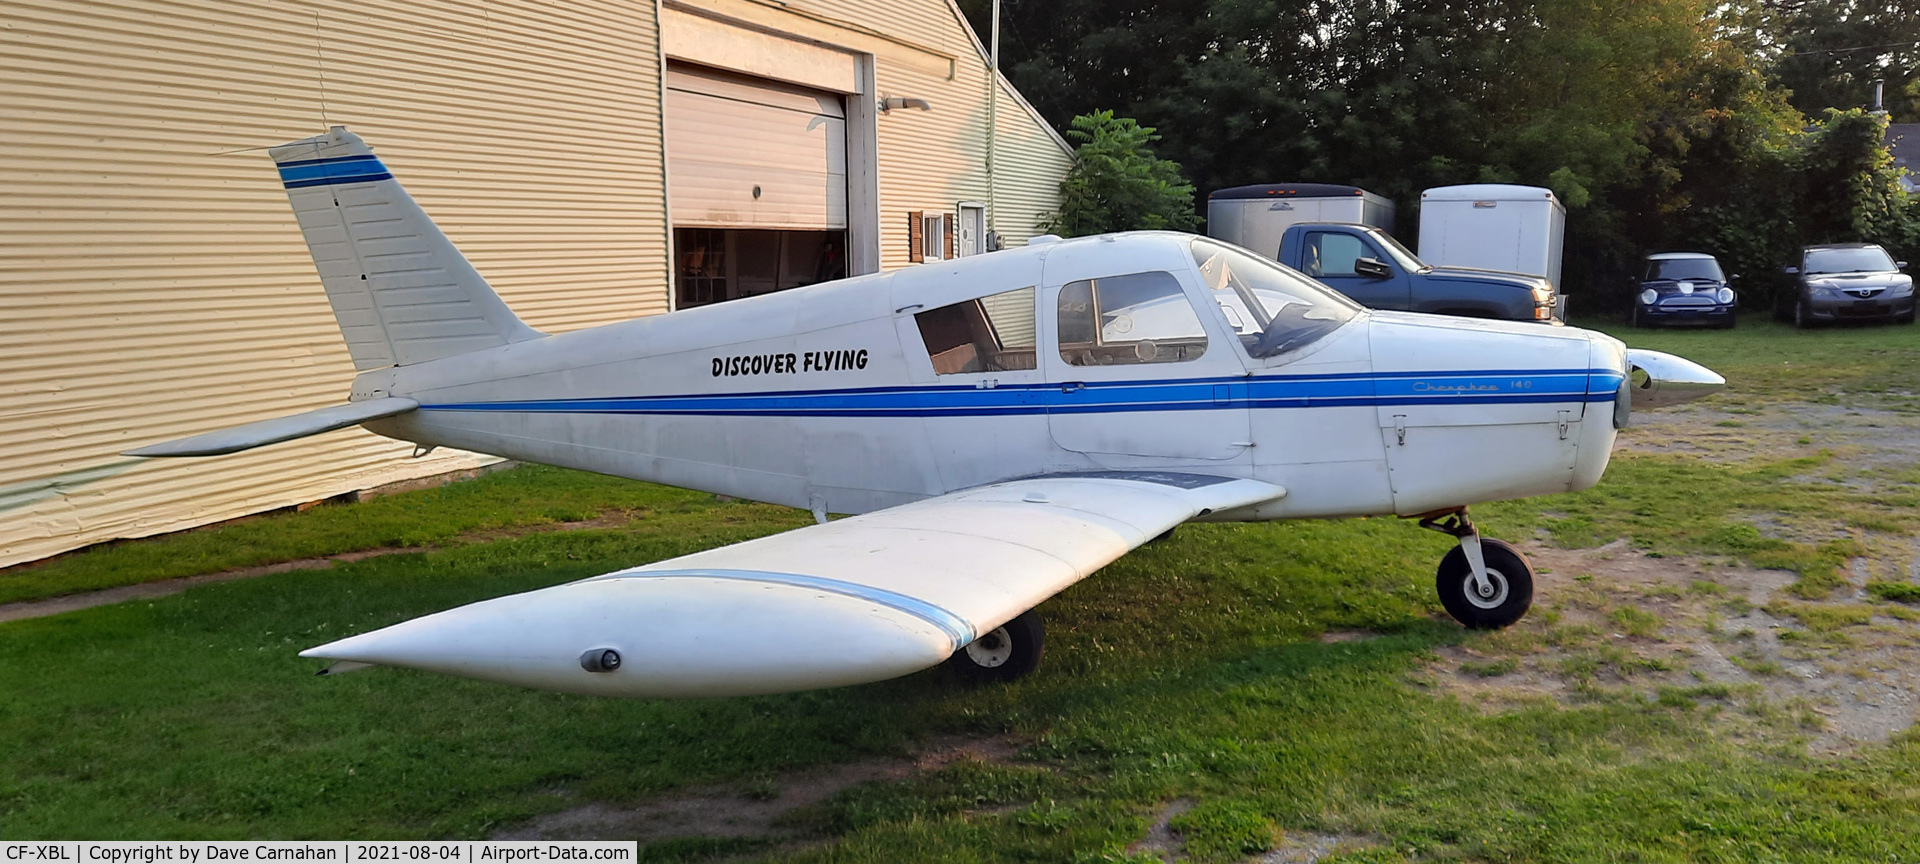 CF-XBL, 1968 Piper PA-28-140 C/N 28-24603, Now de-registered, what was once CF-XBL awaits a new role as a static display aircraft. The registration CF-XBL is currently registered to a Wittman Tailwind